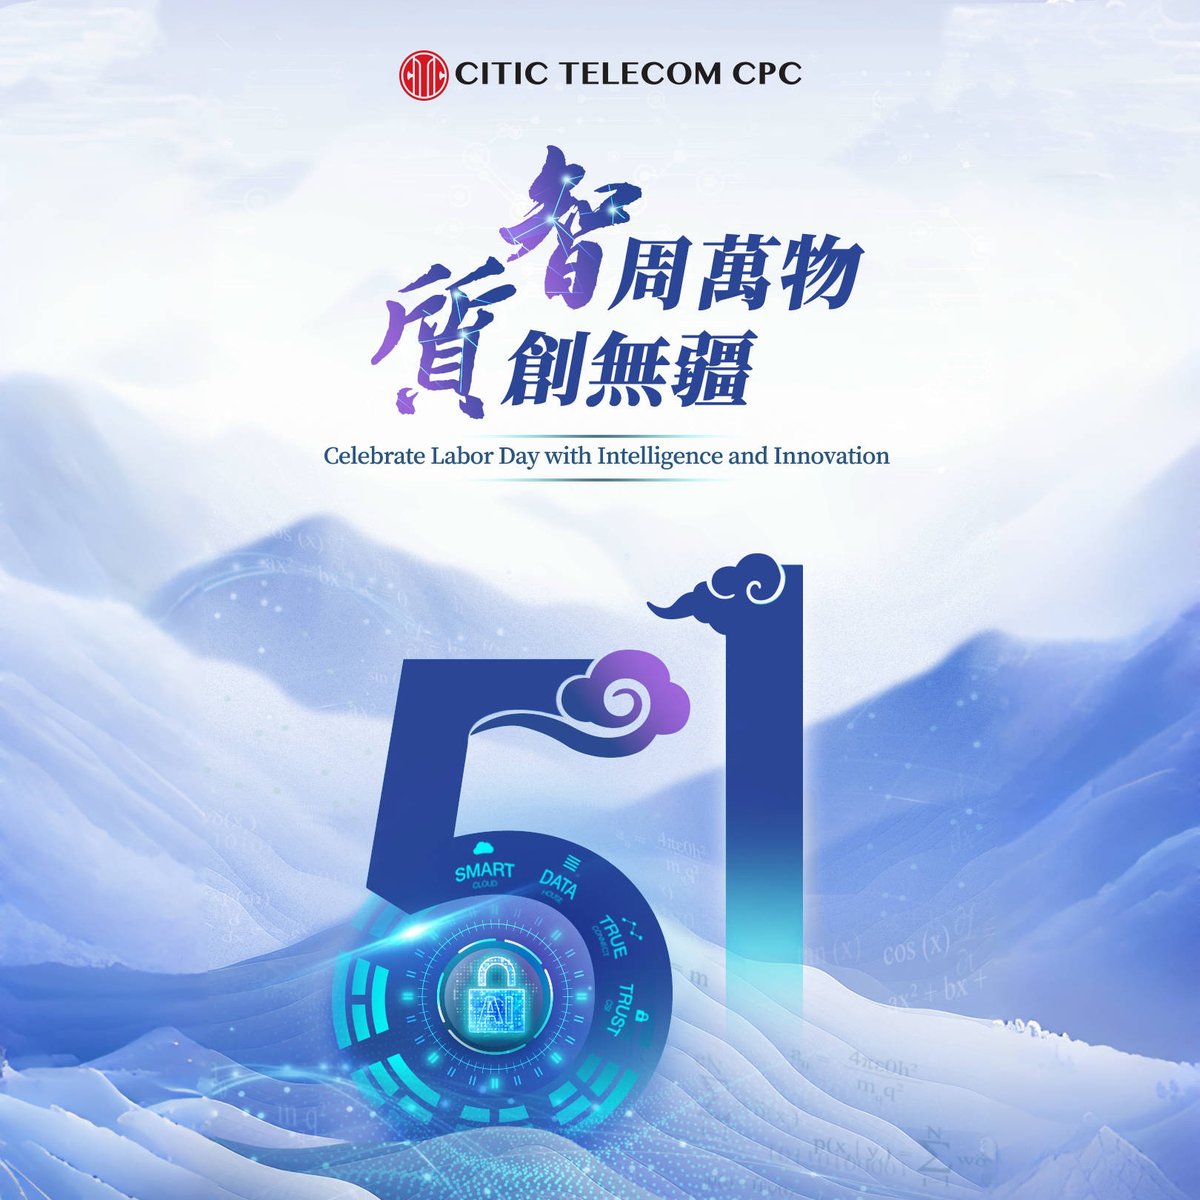 💪🏻 Happy Labor Day! CITIC Telecom CPC pays tribute to everyone who has contributed. We will continue accelerating innovation breakthroughs with Intelligent technology and assist enterprises to achieve digital transformation with high-quality ICT services!